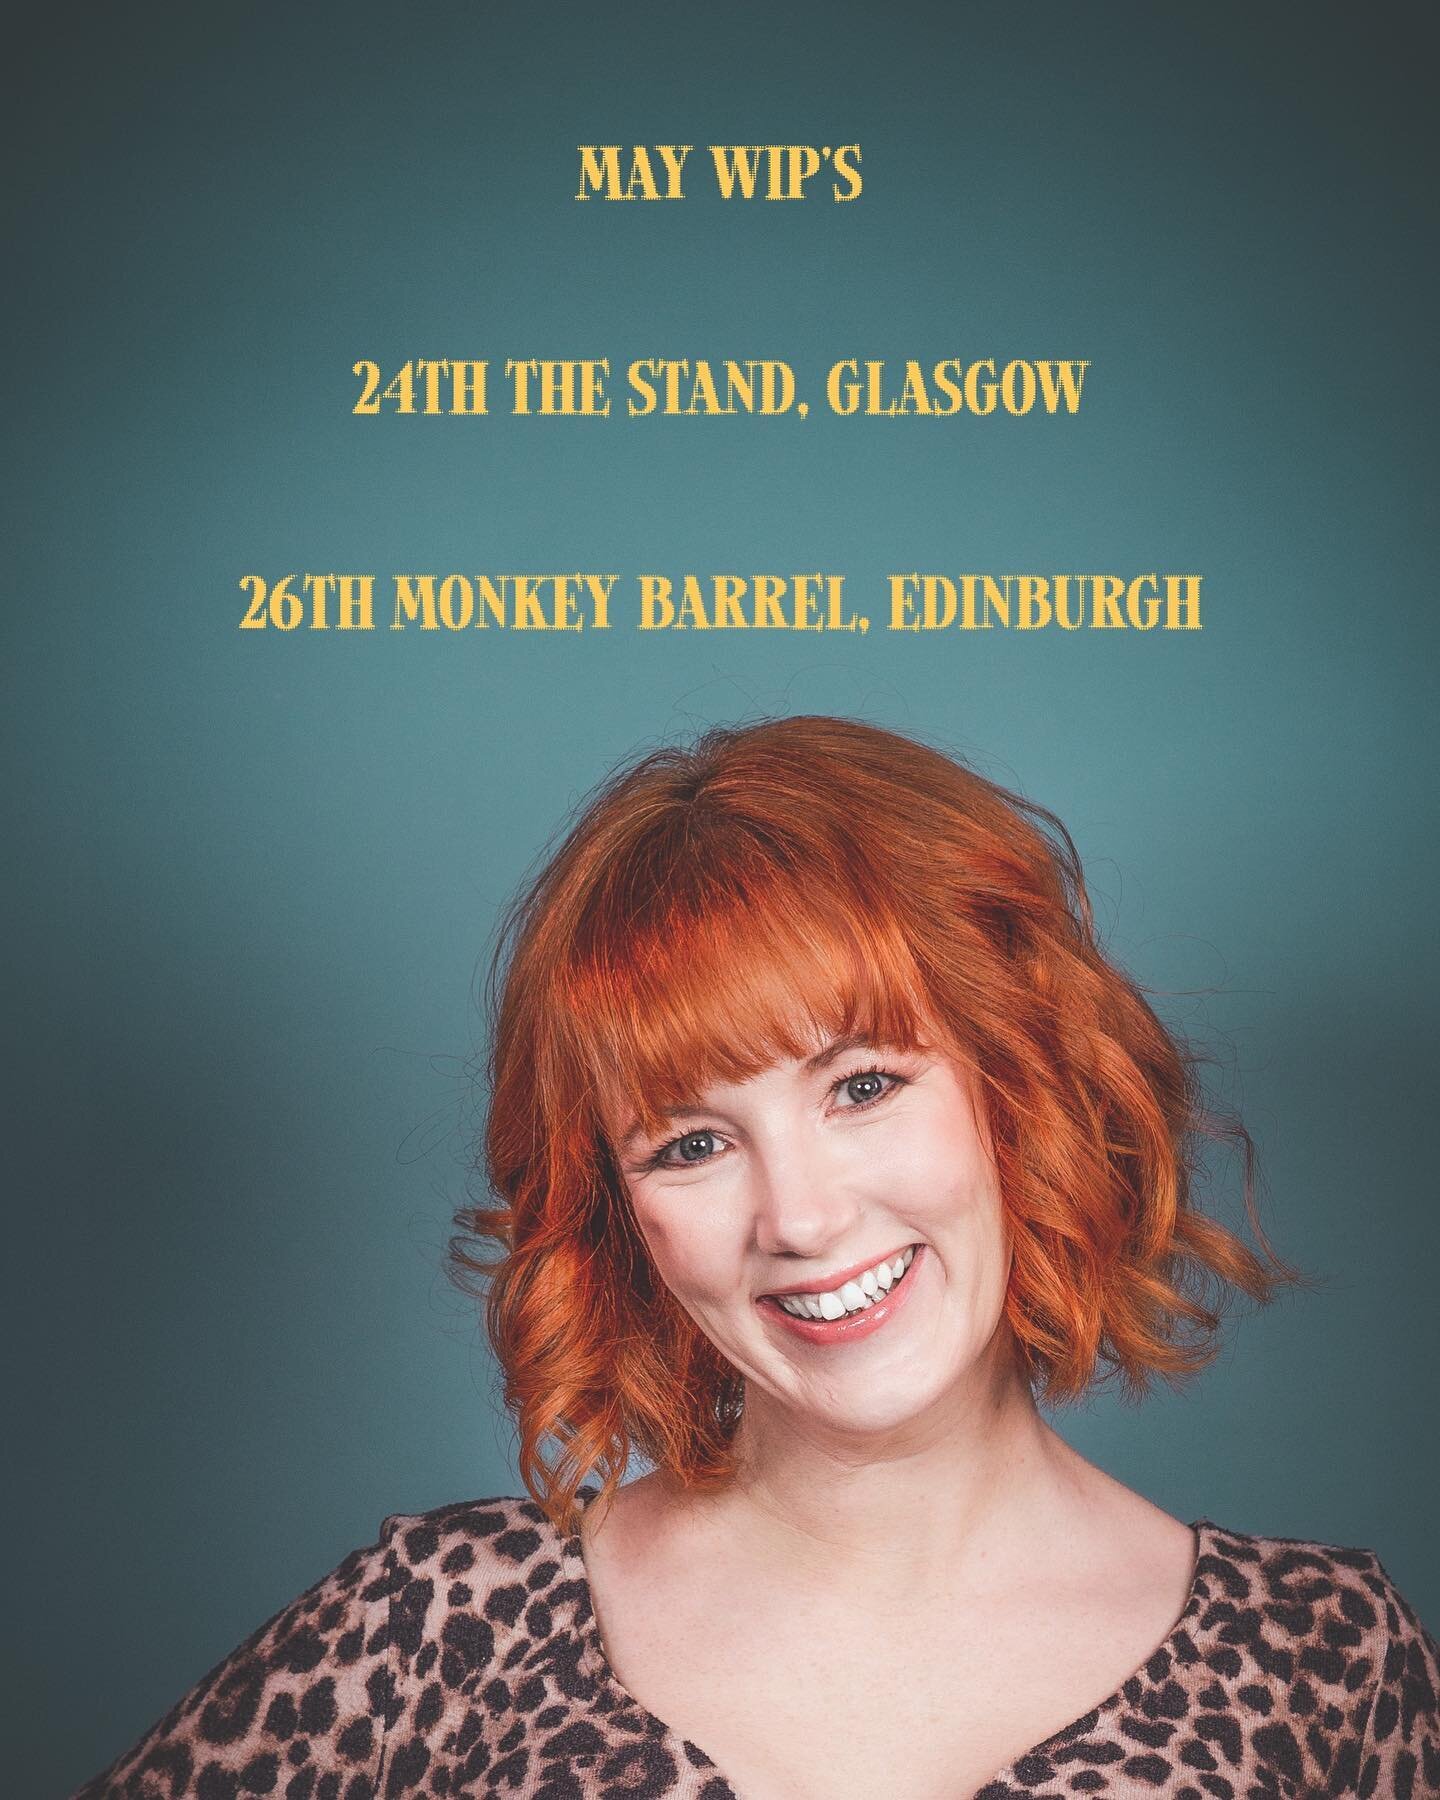 Couple of work in progress shows at the end of the month @thestandglasgow with @liamwithnail and @monkey.barrel.comedy the show is coming together and I&rsquo;m loving performing it. Ticket links for both shows in my bio. 

Really excited about the s